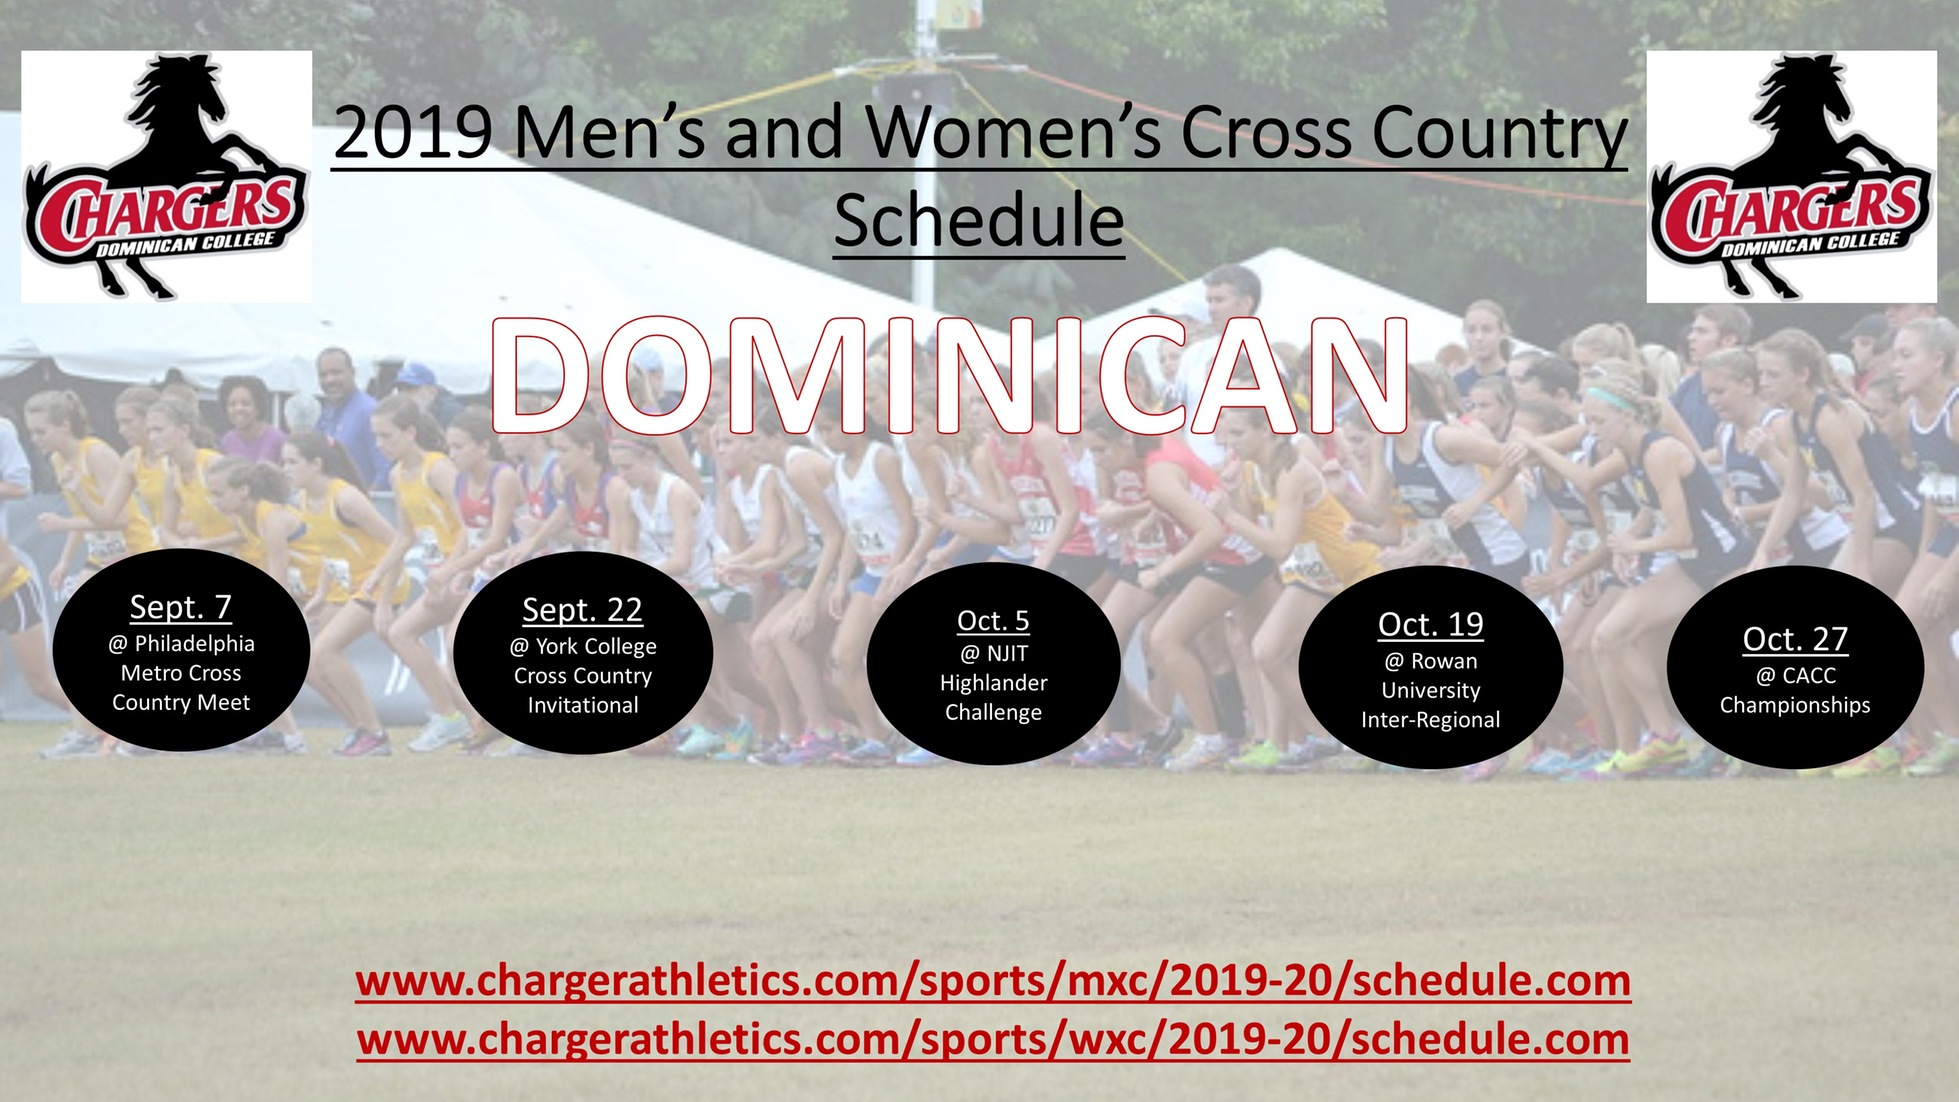 2019 MEN'S AND WOMEN'S CROSS COUNTRY SCHEDULE ANNOUNCED